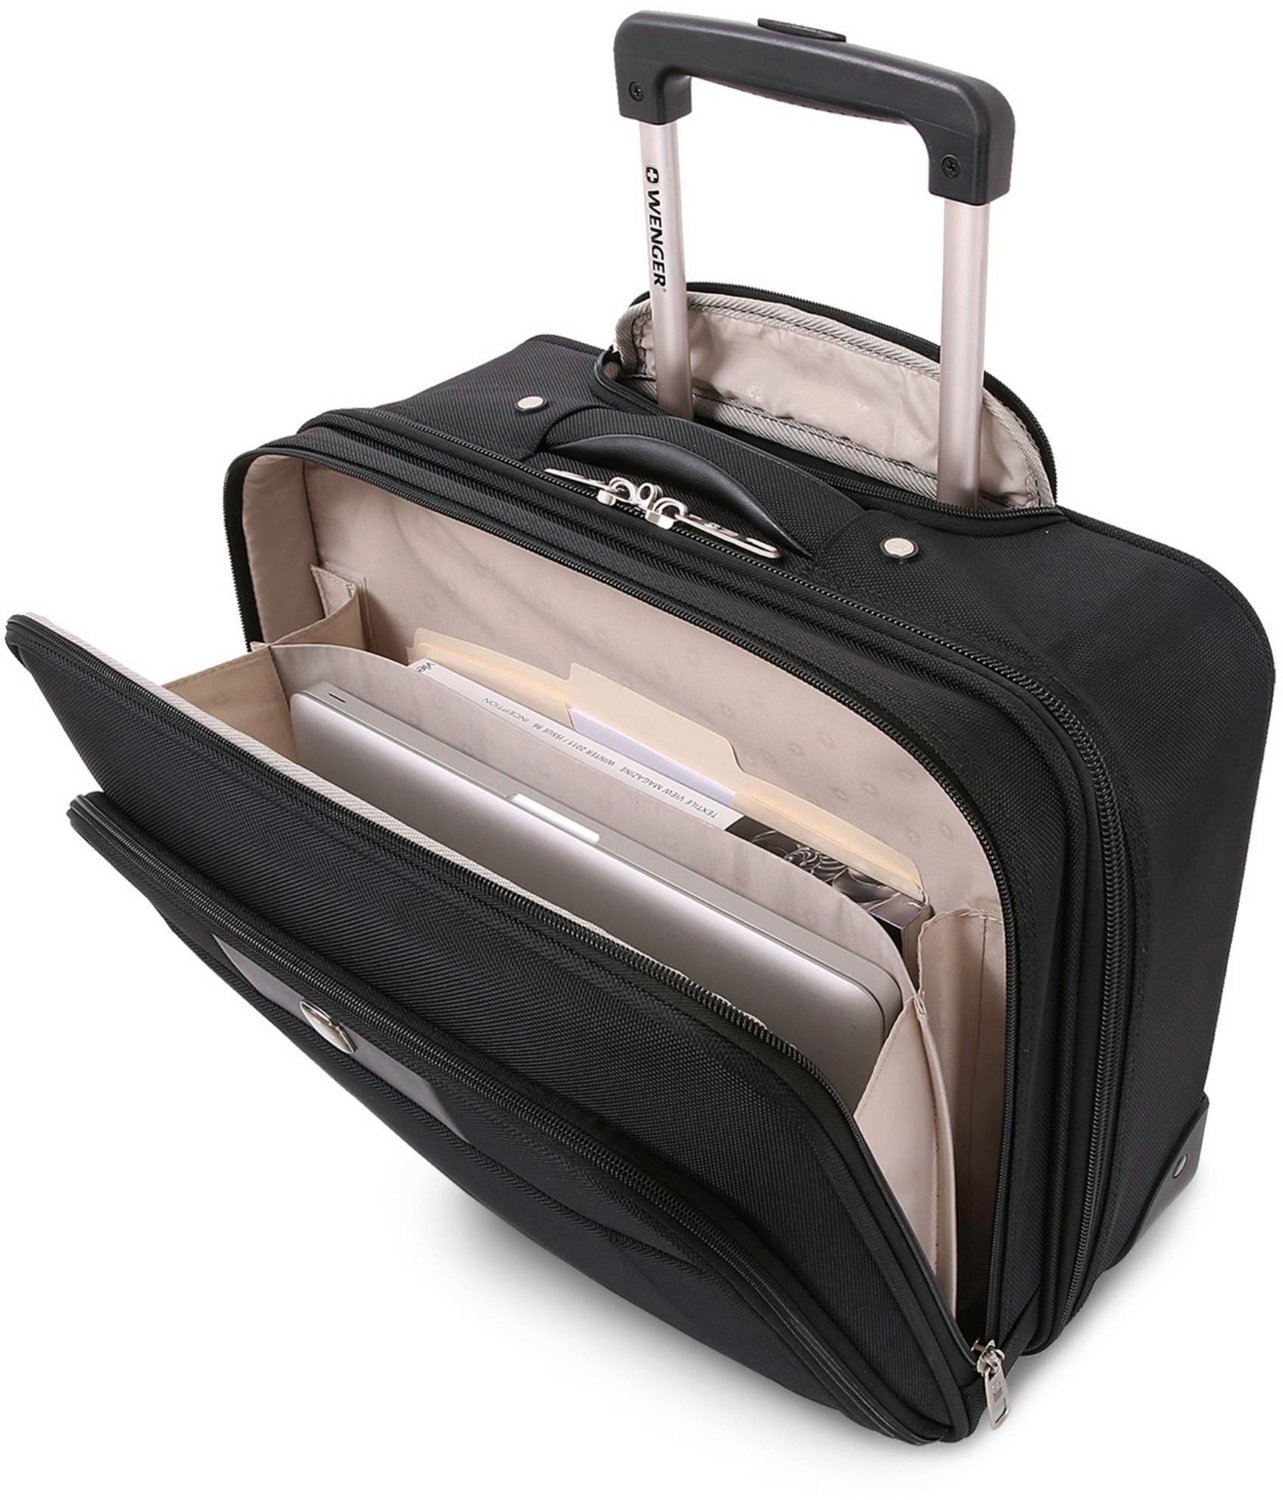 SwissGear Rolling Office Tote Luggage | Academy